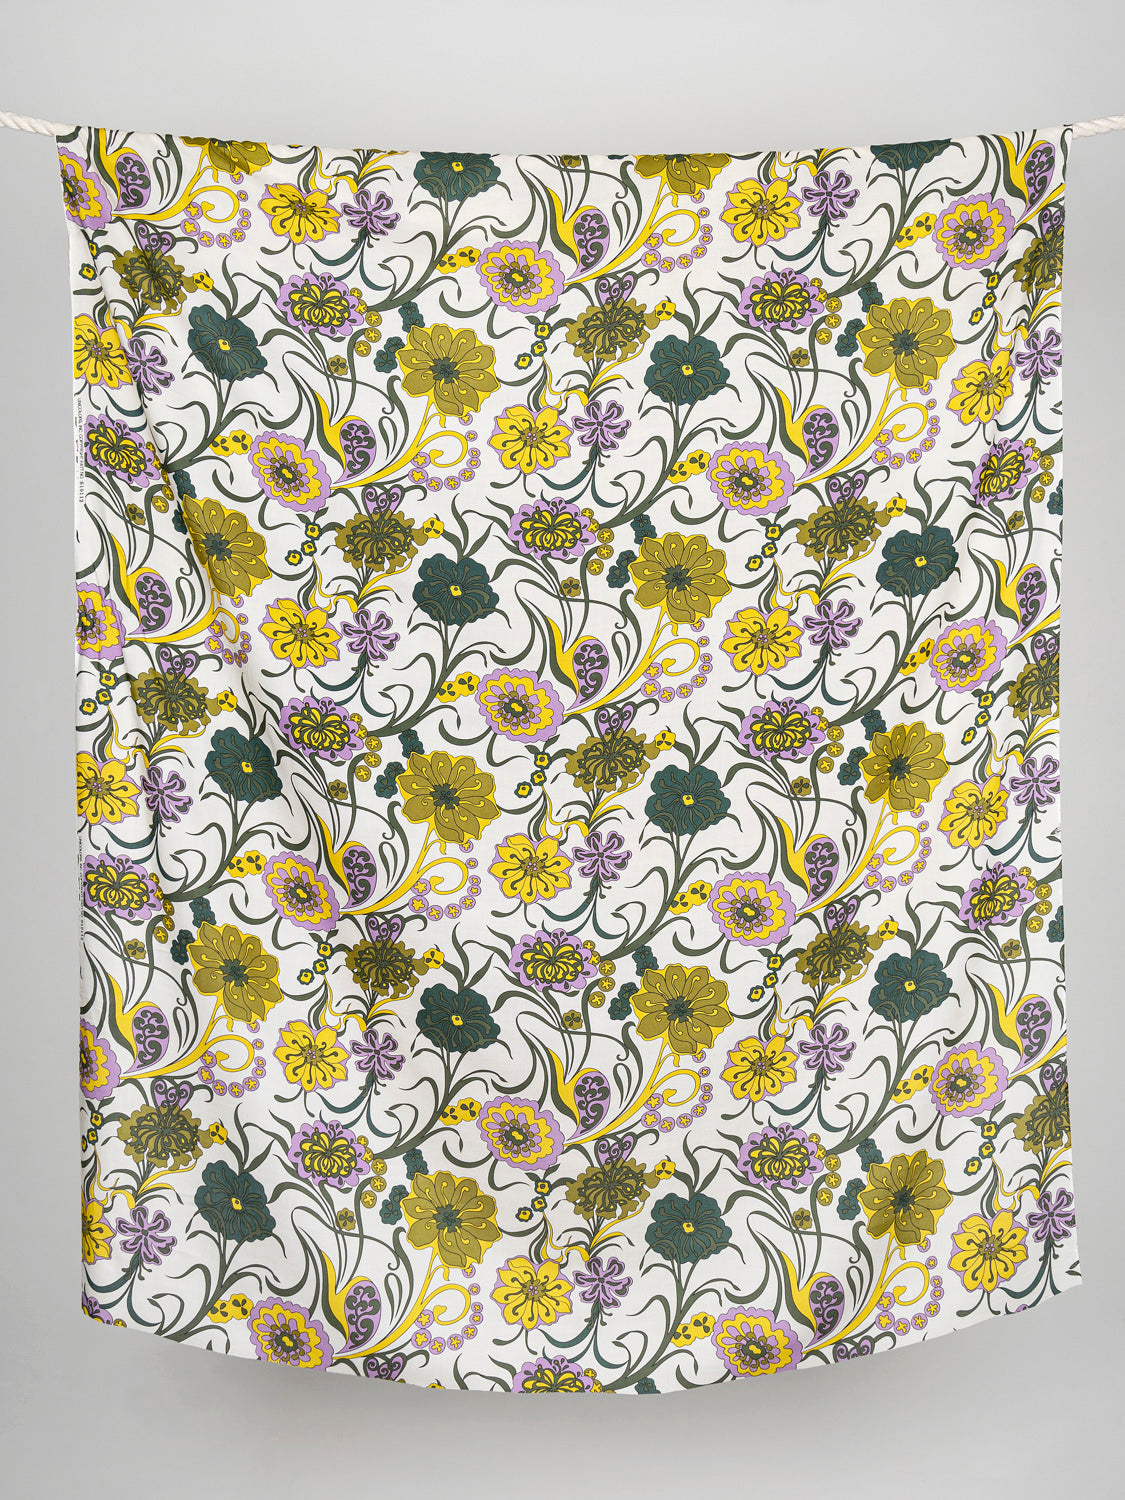 Large 60s Floral Print Rayon Challis Deadstock - Olive + Yellow + Lavender | Core Fabrics